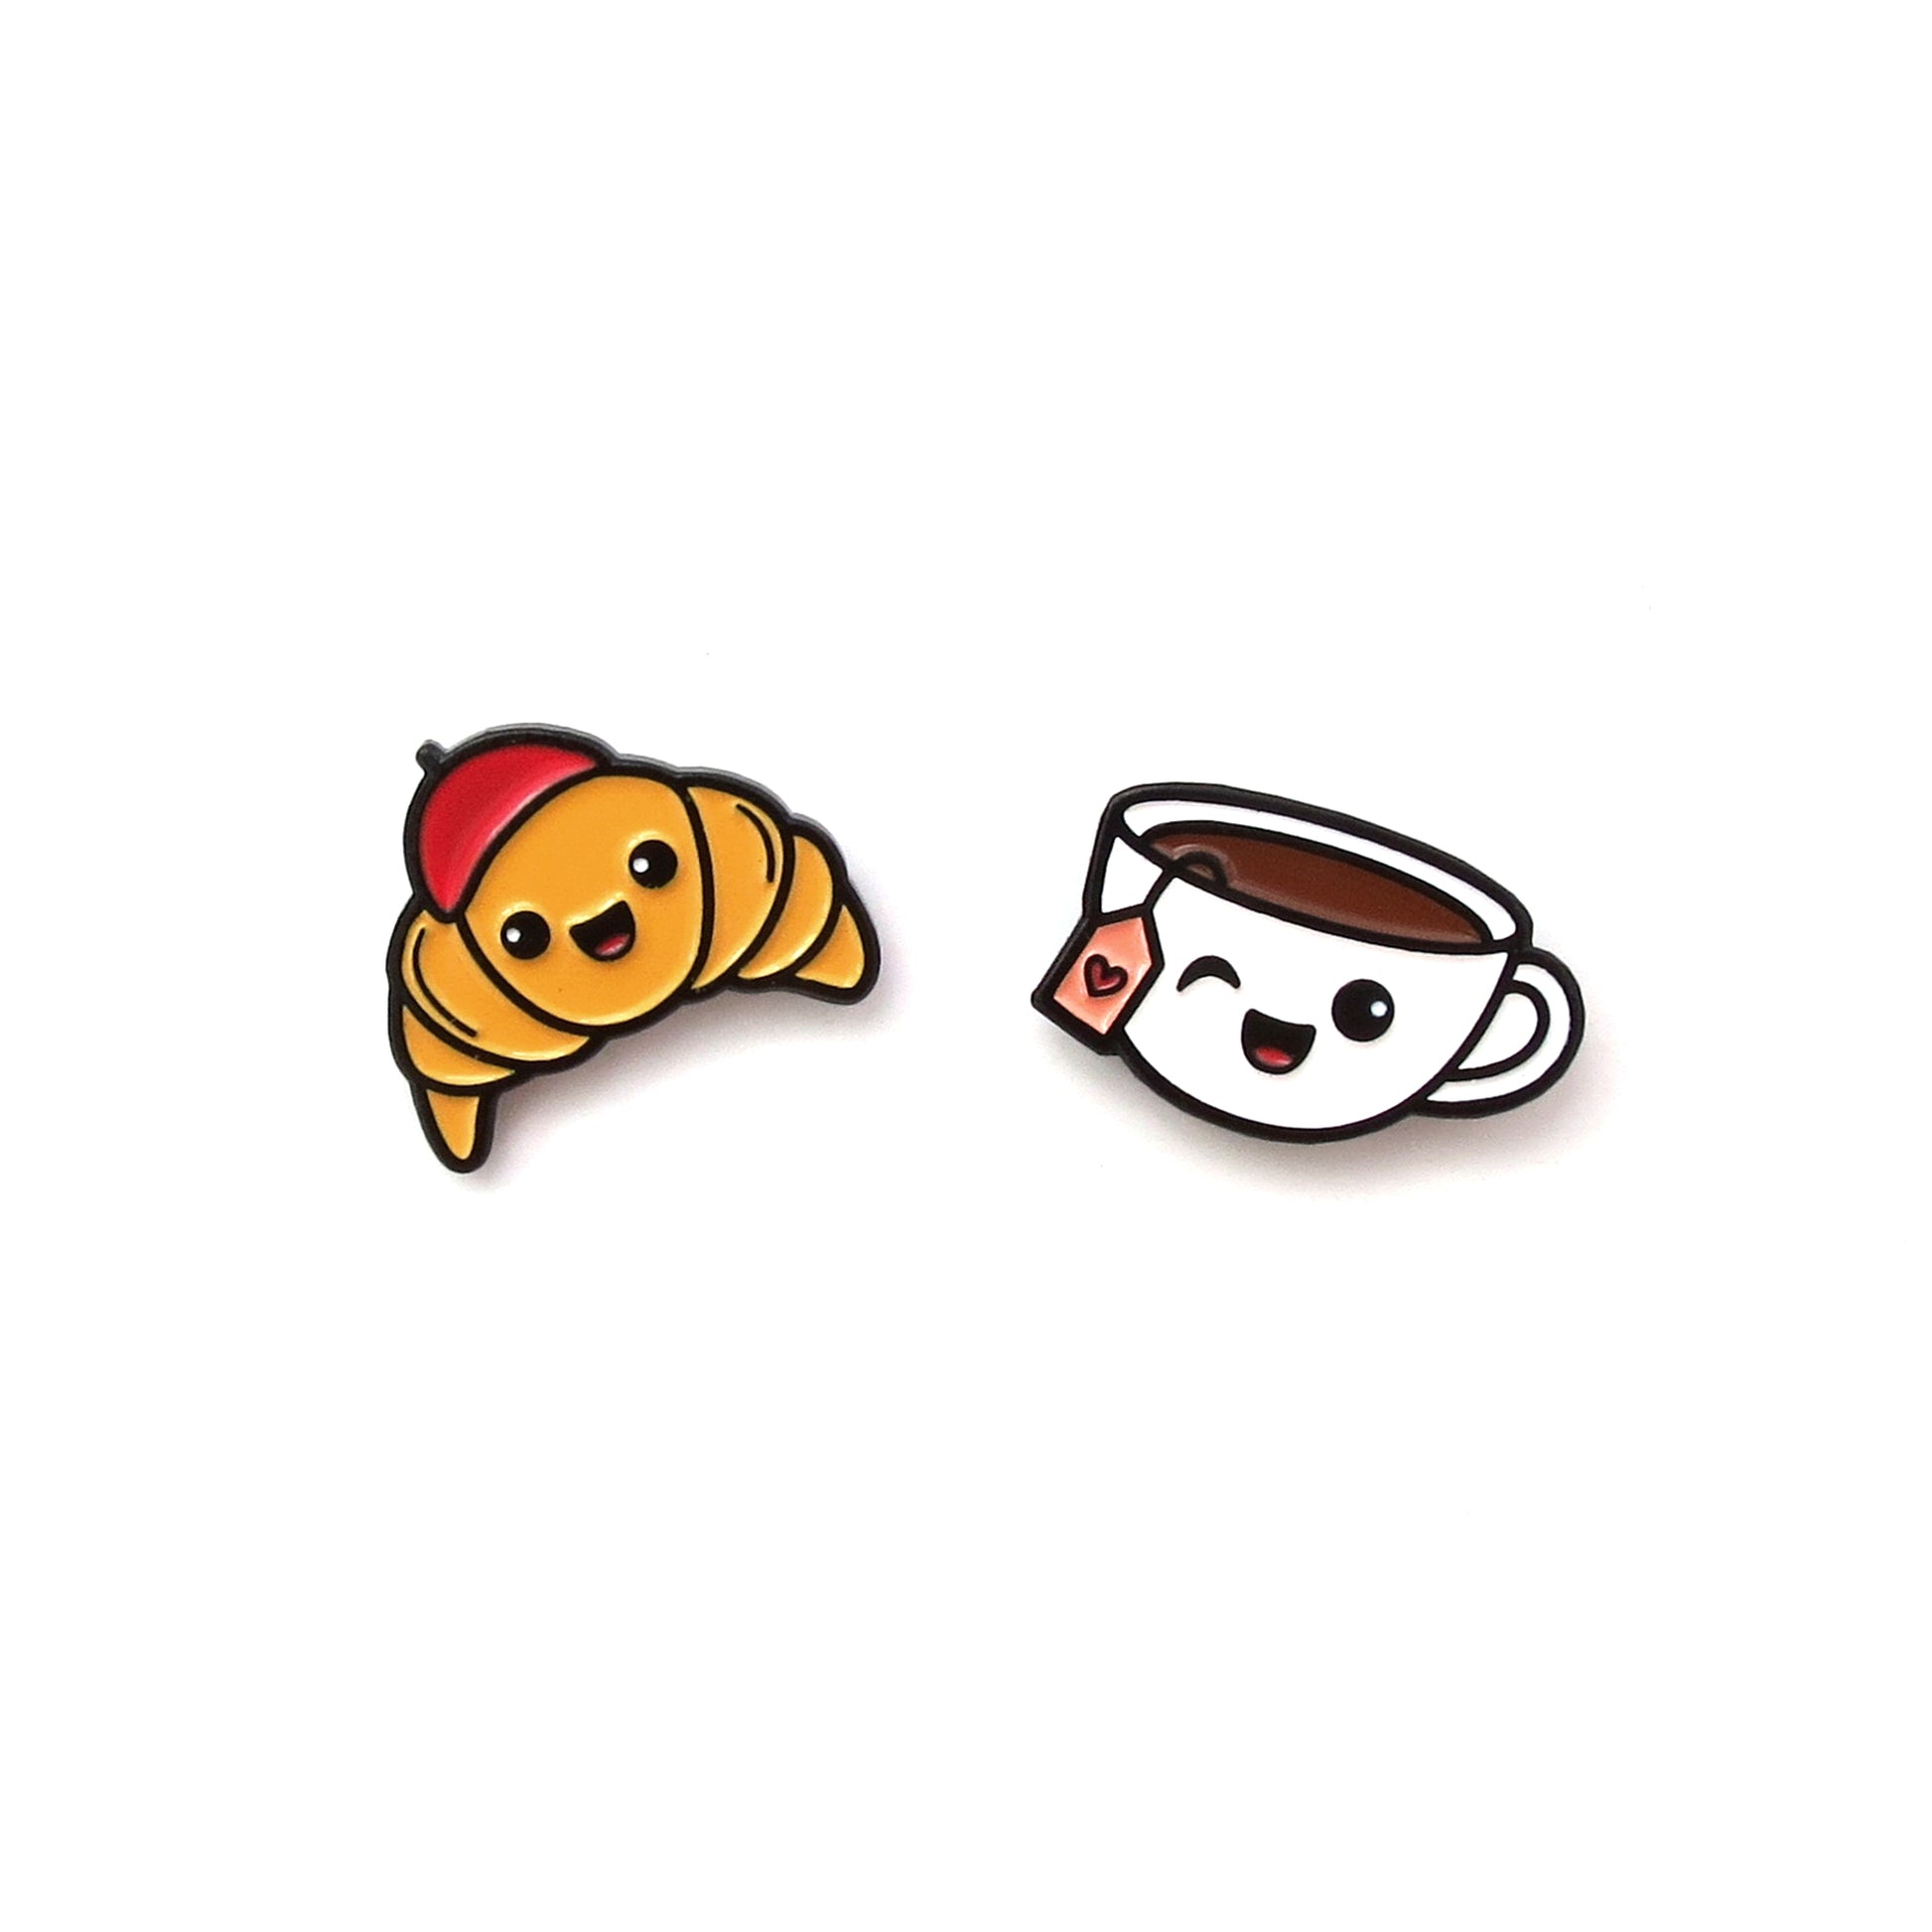 Croissant and Tea enamel pins on white background